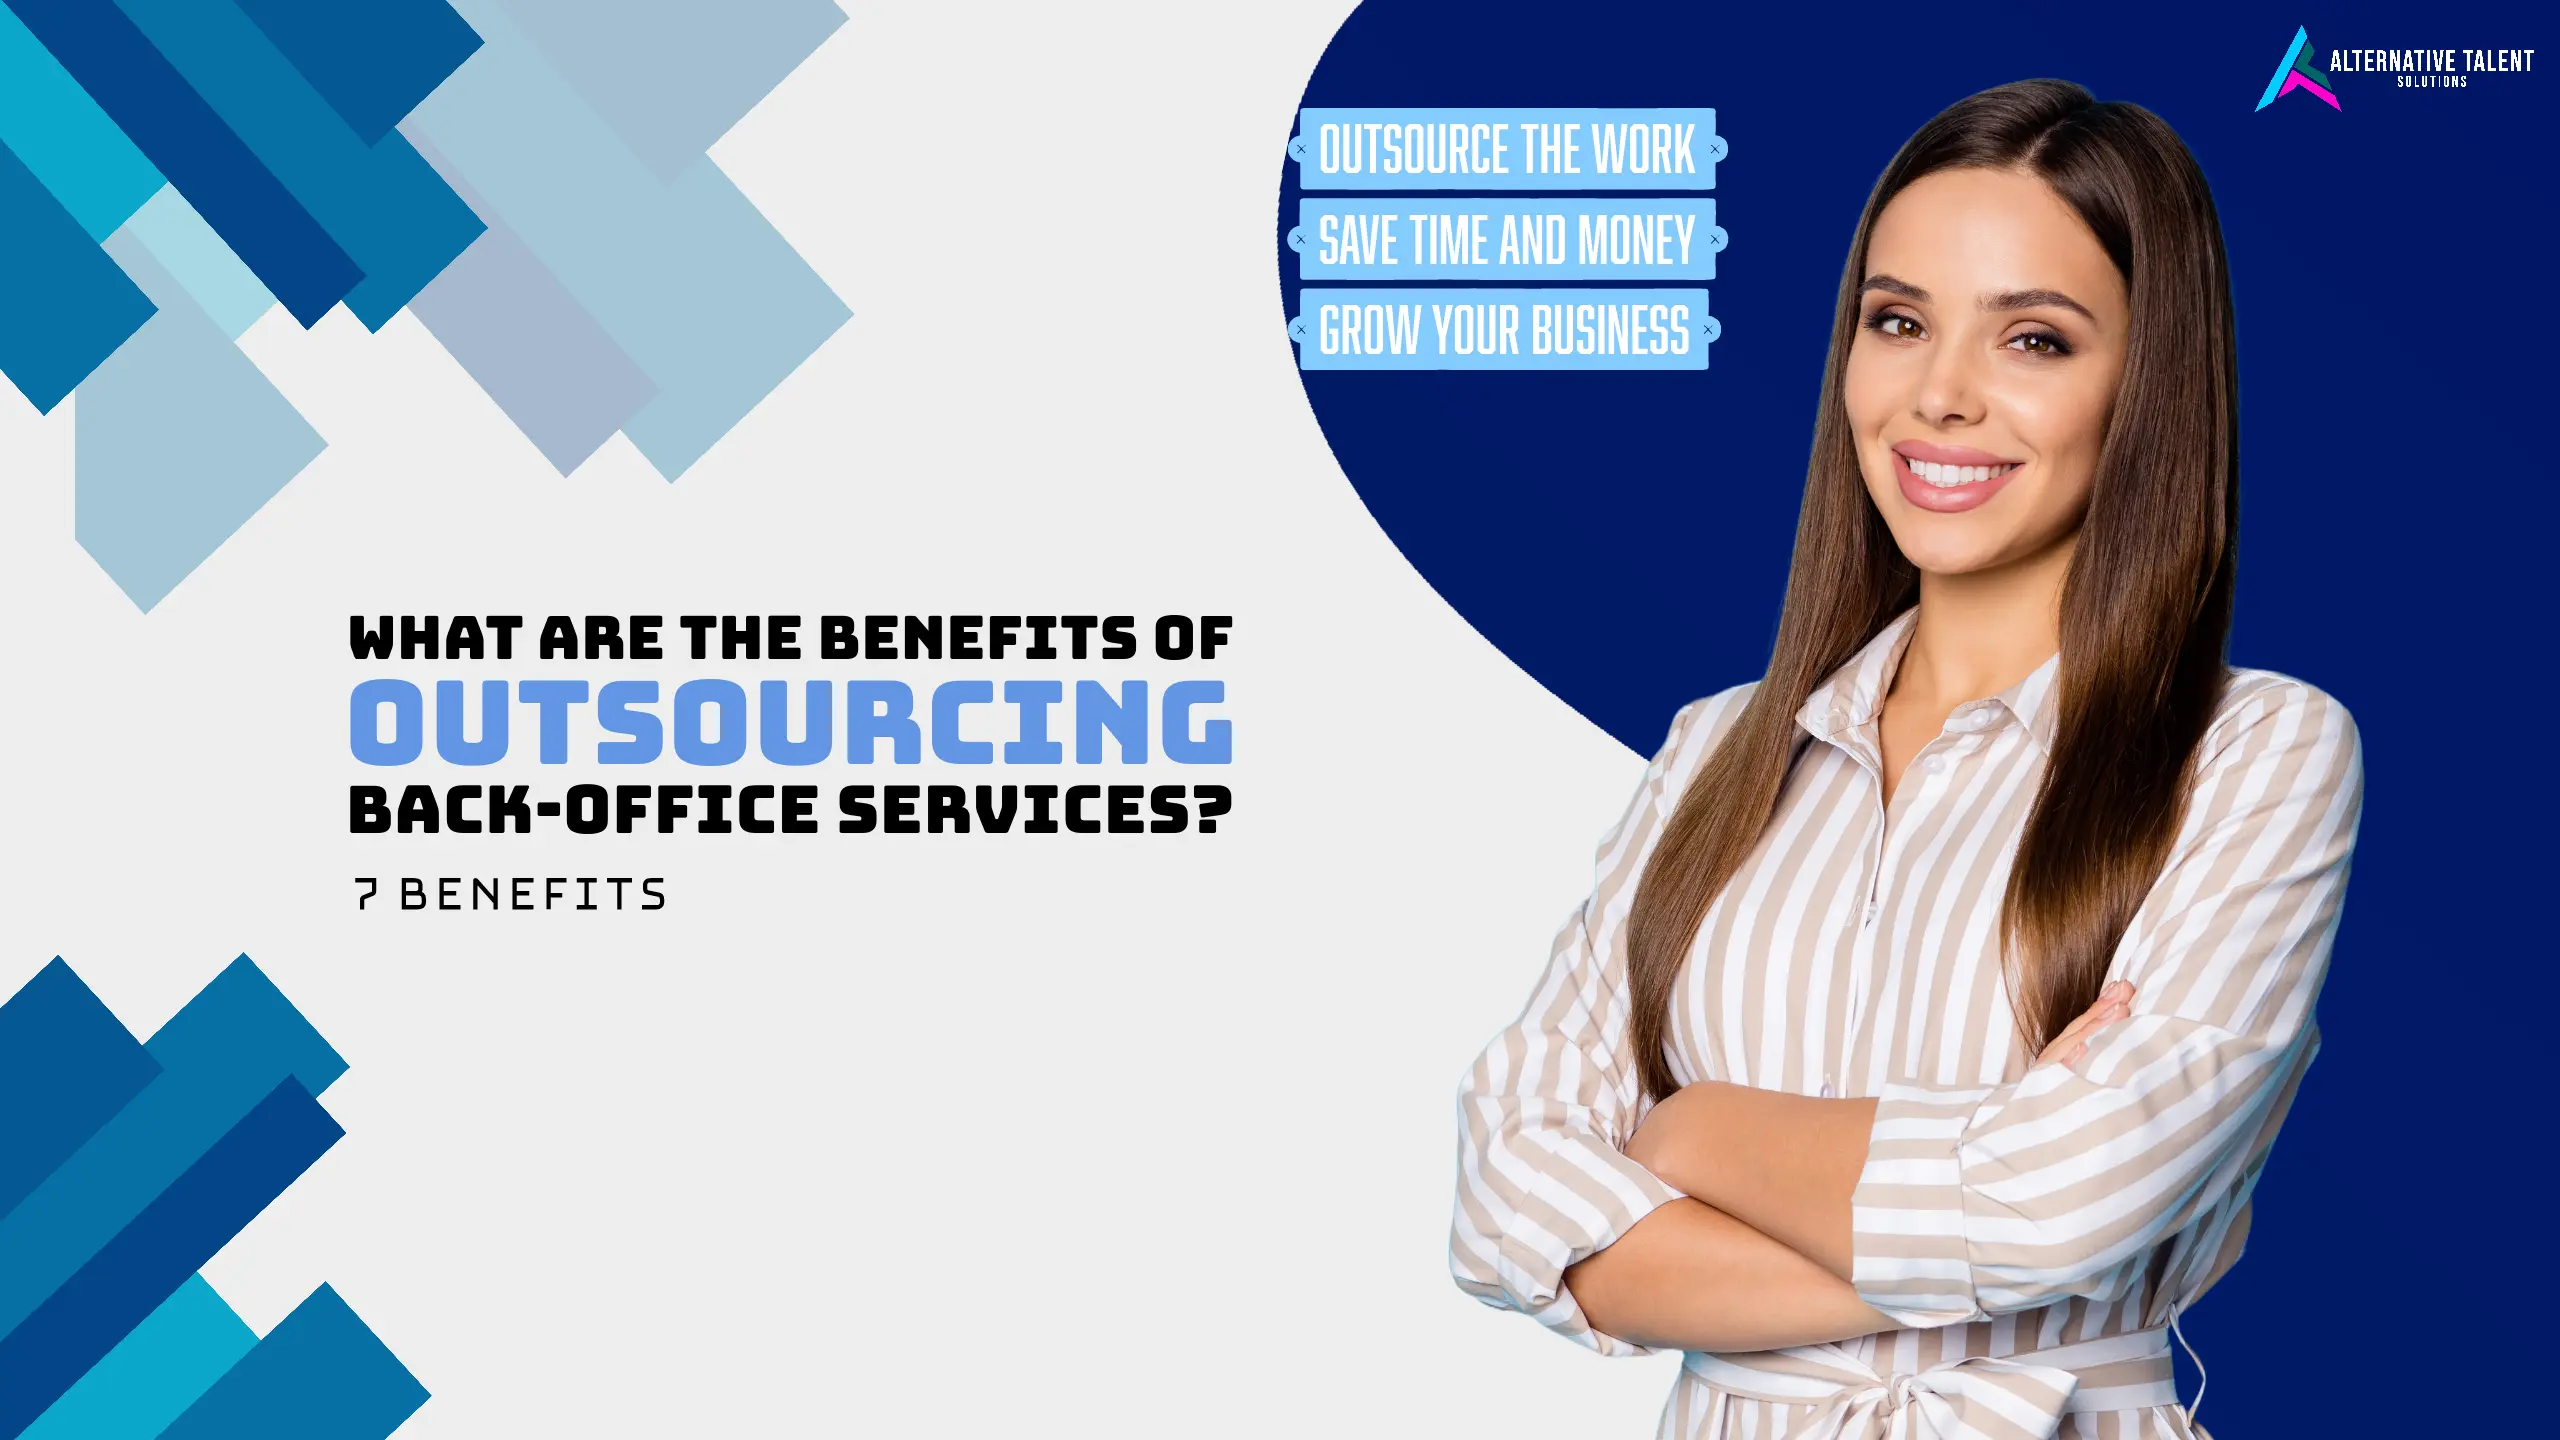 Benefits of Outsourcing Back-Office Services to the Philippines